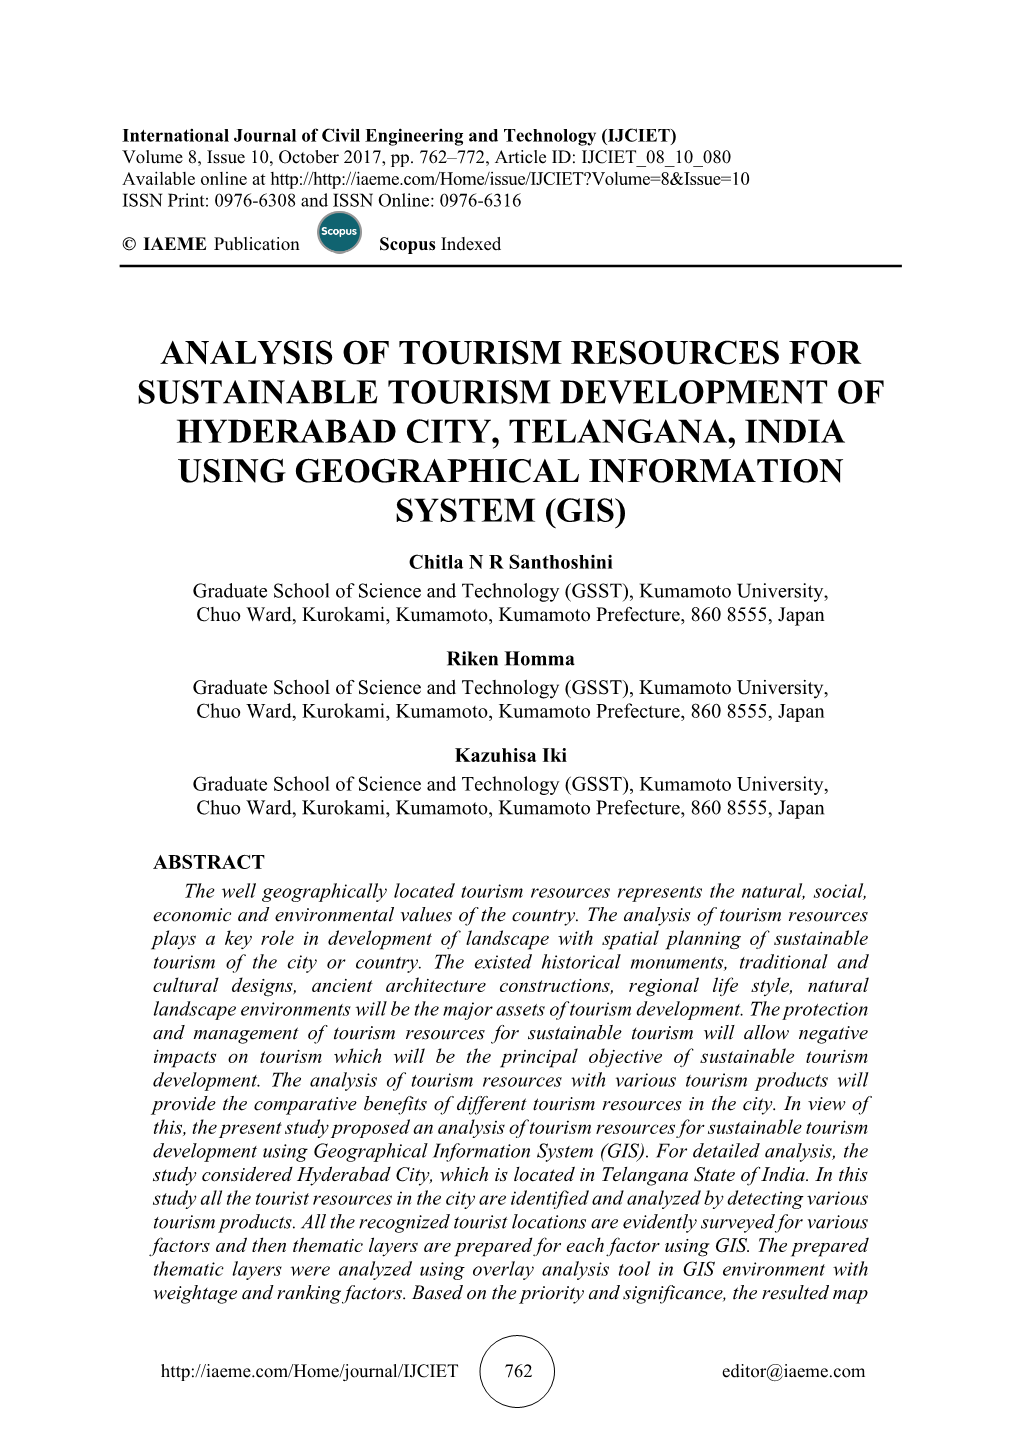 Analysis of Tourism Resources for Sustainable Tourism Development of Hyderabad City, Telangana, India Using Geographical Information System (Gis)